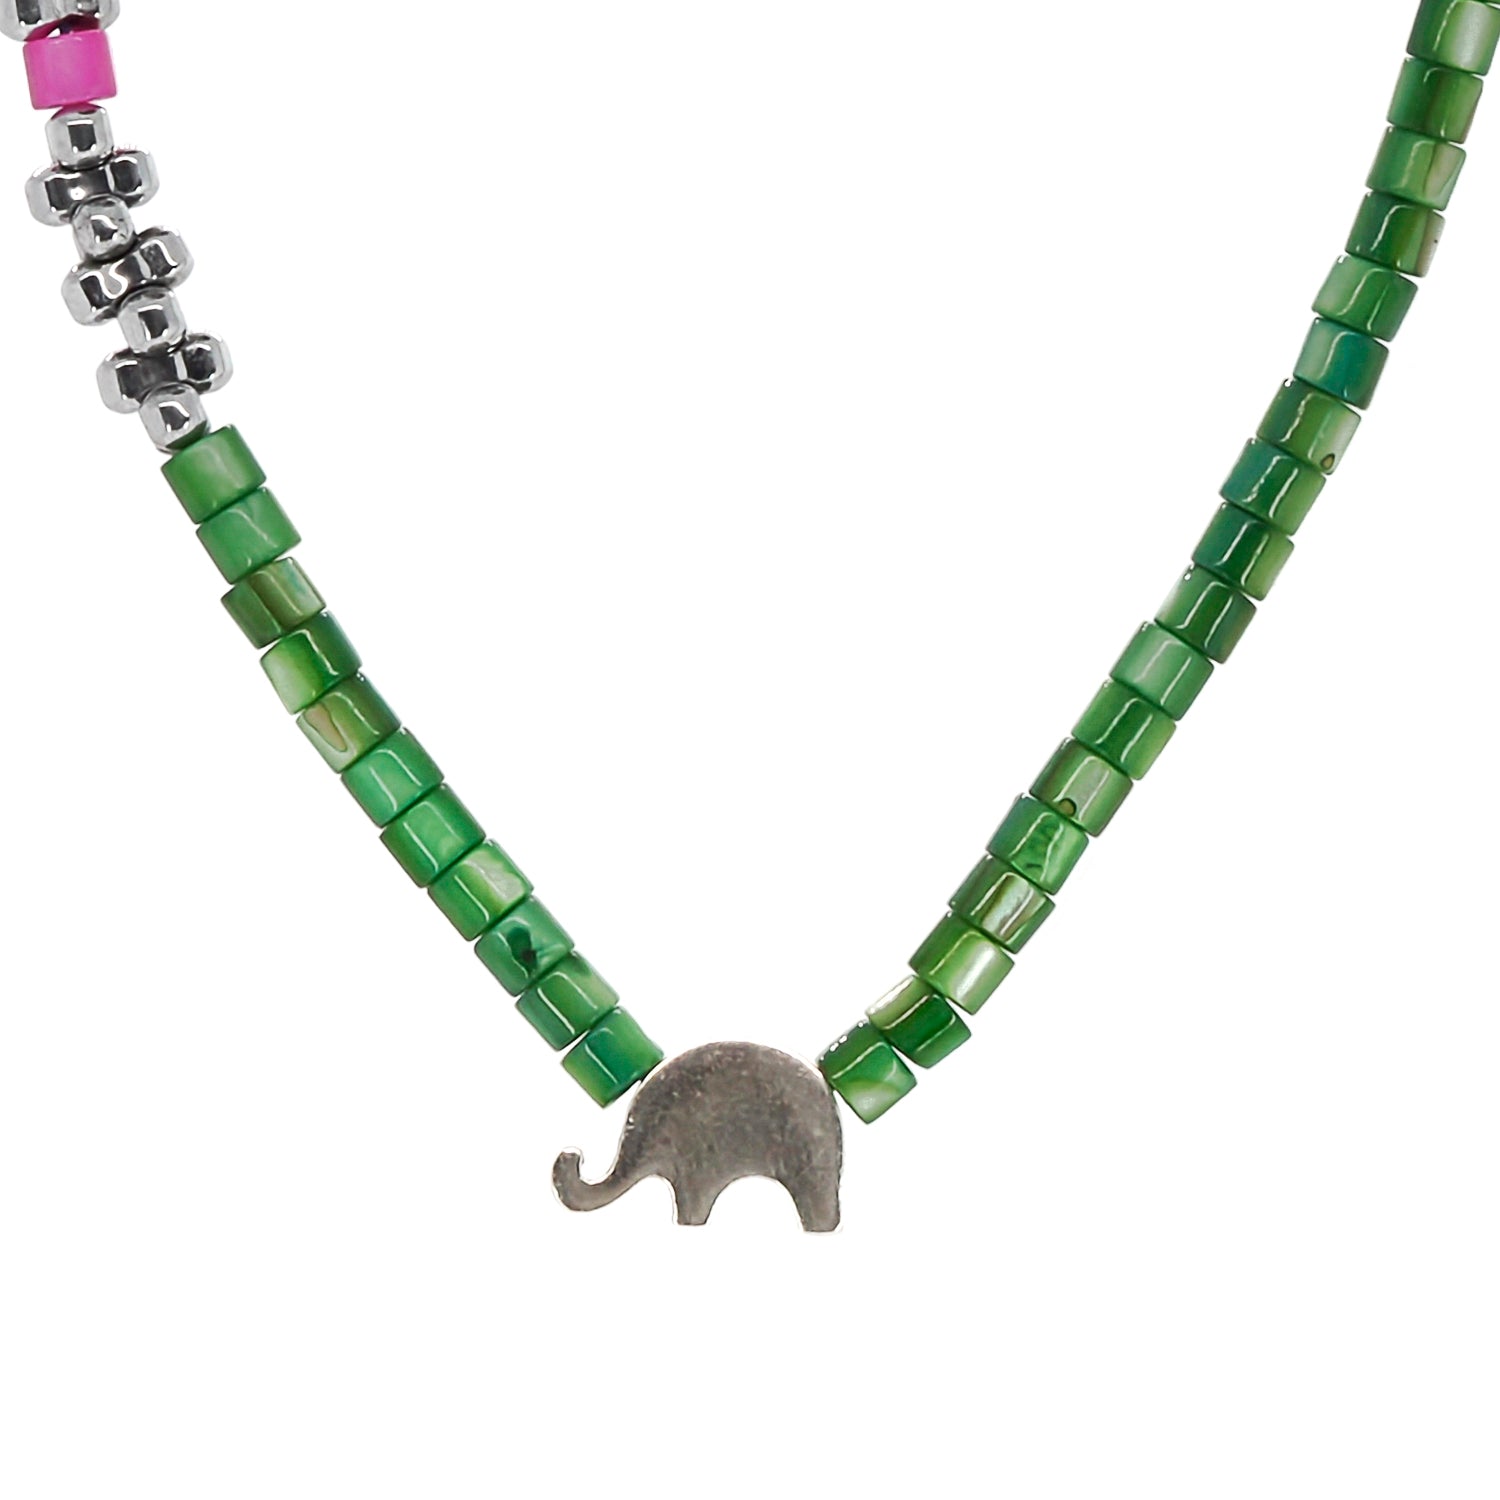 Symbolic Sophistication: Charming Elephant Pendant on Lustrous Green Pearl Beads